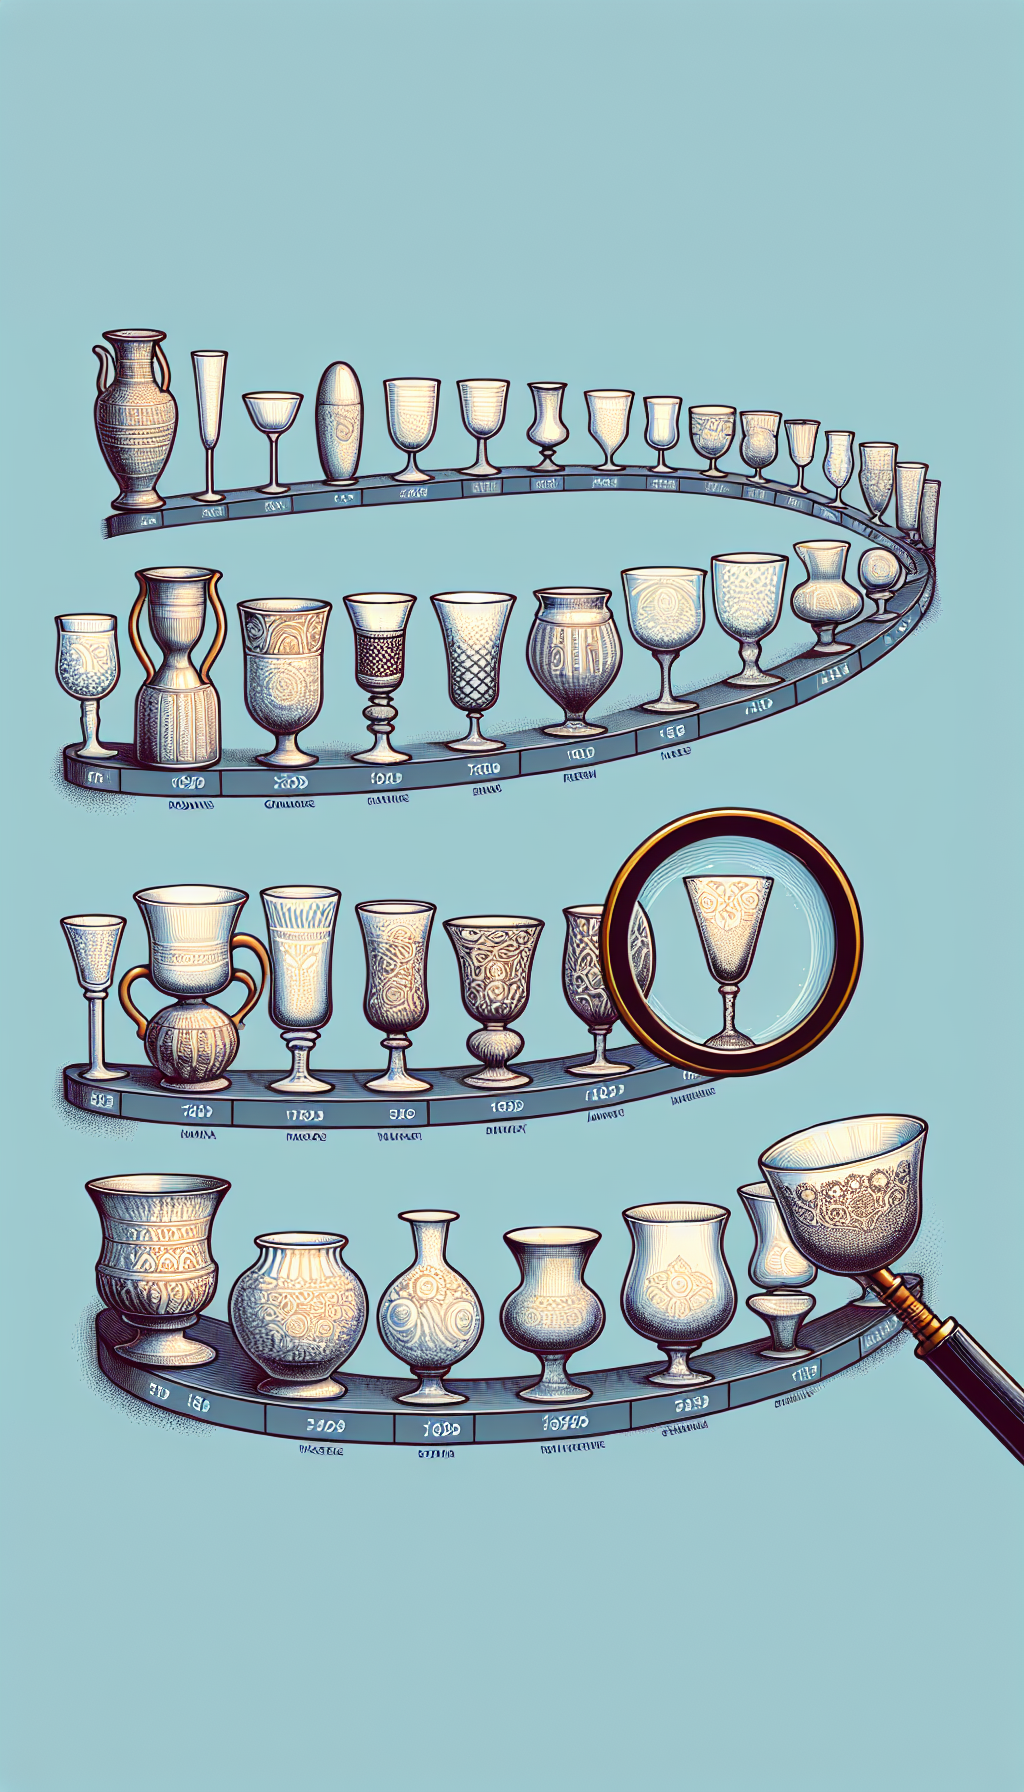 An illustrated timeline flows gracefully, morphing through various historical glassware shapes—starting from ancient Phoenician vases and effortlessly transitioning to Roman goblets, medieval beakers, and finishing with Victorian cut crystal. Each piece has a magnifying glass hovering over, revealing intricate patterns or maker's marks, symbolizing the detective work of antique glassware identification.